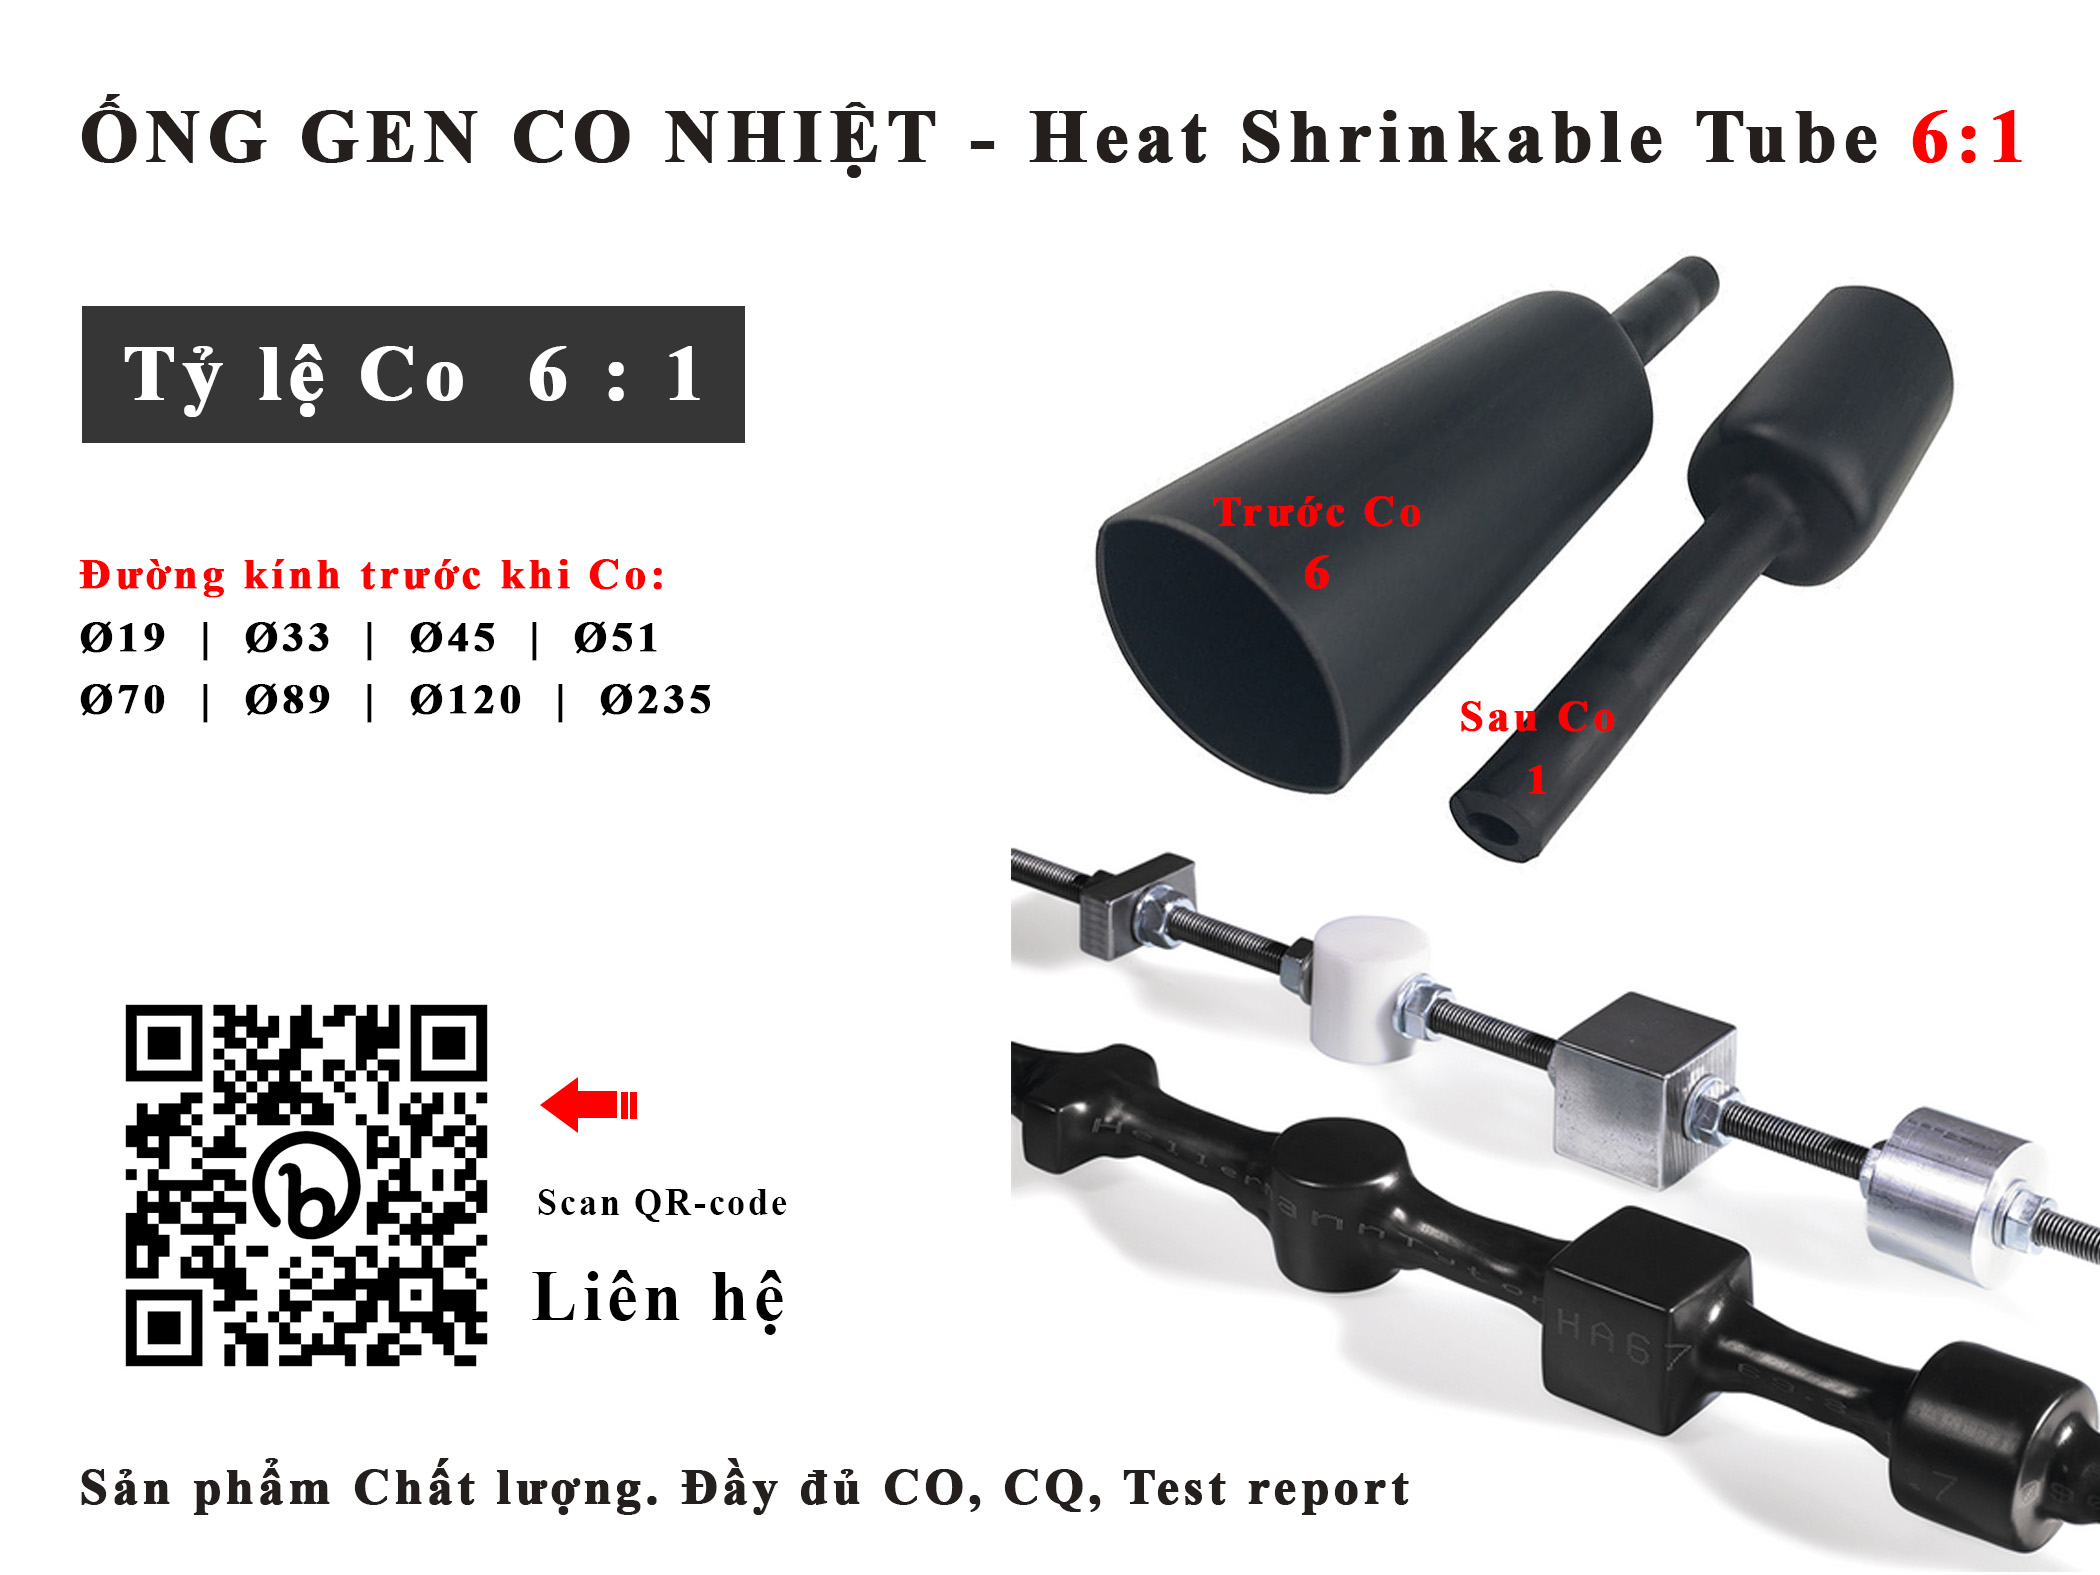 ống co nhiệt tỷ lệ co 6:1; ống gen co nhiệt tỷ lệ co 5:1; gen co nhiệt tỉ lệ co 4:1; gen co nhiệt cách điện tỷ lệ co 3:1; ống co nhiệt tỷ lệ co 2:1; ong co nhiet ty le co 6:1; ong gen co nhiet ty le co 5:1; gen co nhiet ti le co 4:1; gen co nhiet cach dien ty le co 3:1; ong co nhiet ty le co 2:1; gen co nhiệt bọc dây điện; ống gen co nhiệt cách điện; dây co nhiệt; ống gen chịu nhiệt chống cháy; gen co nhiệt trong suốt; ống co nhiệt trung thế; ống gen co nhiệt trung thế; ống co nhiệt trung thế 3m; ống co nhiệt trung thế raychem; ống co nhiệt phi 2mm; ống gen co nhiệt phi 6; ống gen co nhiệt phi 10; ống gen co nhiệt phi 16; ống gen co nhiệt phi 20; ống gen co nhiệt phi 25; ống gen co nhiệt phi 30; ống gen co nhiệt phi 40; ống gen co nhiệt phi 50; ống gen co nhiệt phi 120; ống co nhiệt loại lớn; ống cao su co nhiệt; ống co nhiệt có keo; ống gen co nhiệt có keo; adhesive lined heat shrink tube; glue lined heat shrink tubing; medium wall heat shrink tubing; heat shrink tube for outdoor environment; waterproof heat shrink tube; shrink ratio 3:1; uv resistant heat shrink tube; mwtm sst-m sst-fr raychem te connectivity; compliance with rohs ; irrax™sleeve scm2 scd sumitube; 3m imcsn mdt; ls tube adhesive-lined lg-catv lg-phwt ls-phwt-fr lg-pmwt ls-pmwt-fr; gala gmw ghw; dsg-canusa cfm;